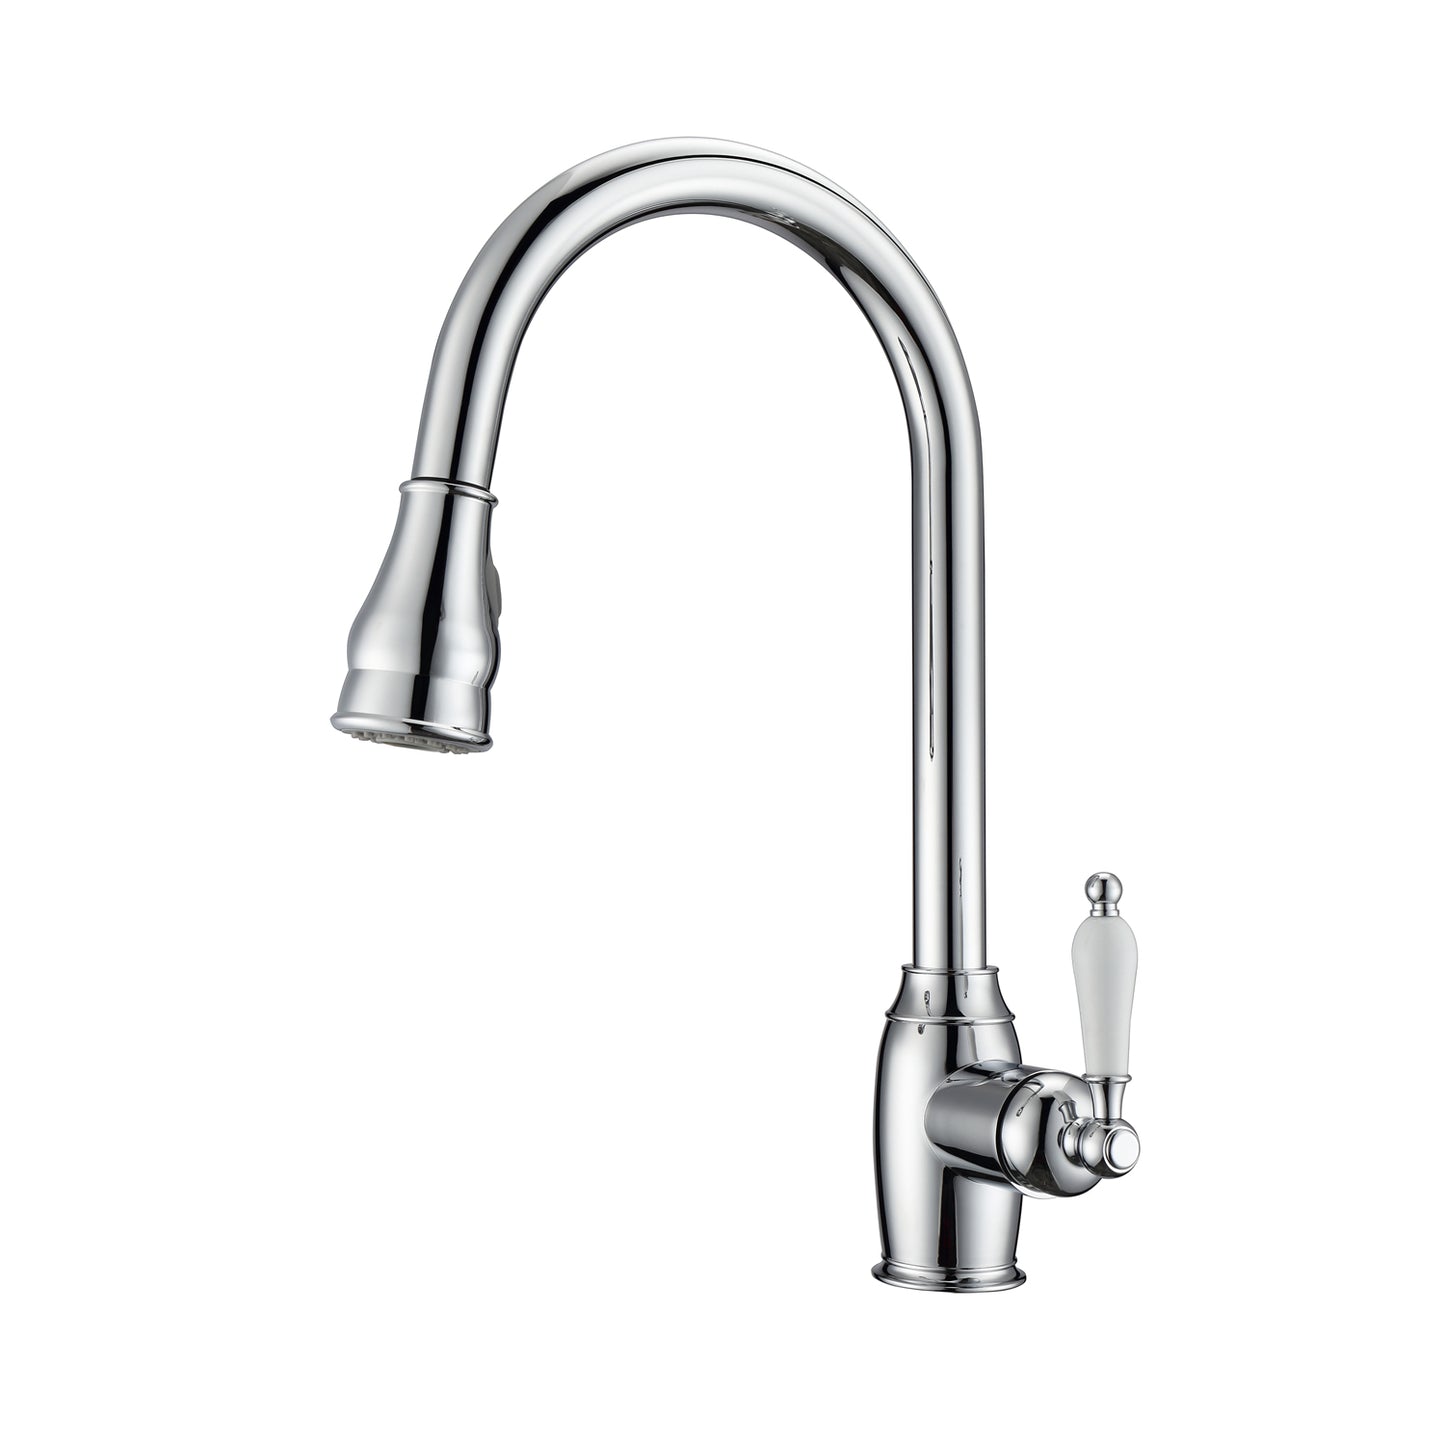 Bay Kitchen Faucet, Pull-Out Sprayer, Single Porcelain Lever Handle, Chrome